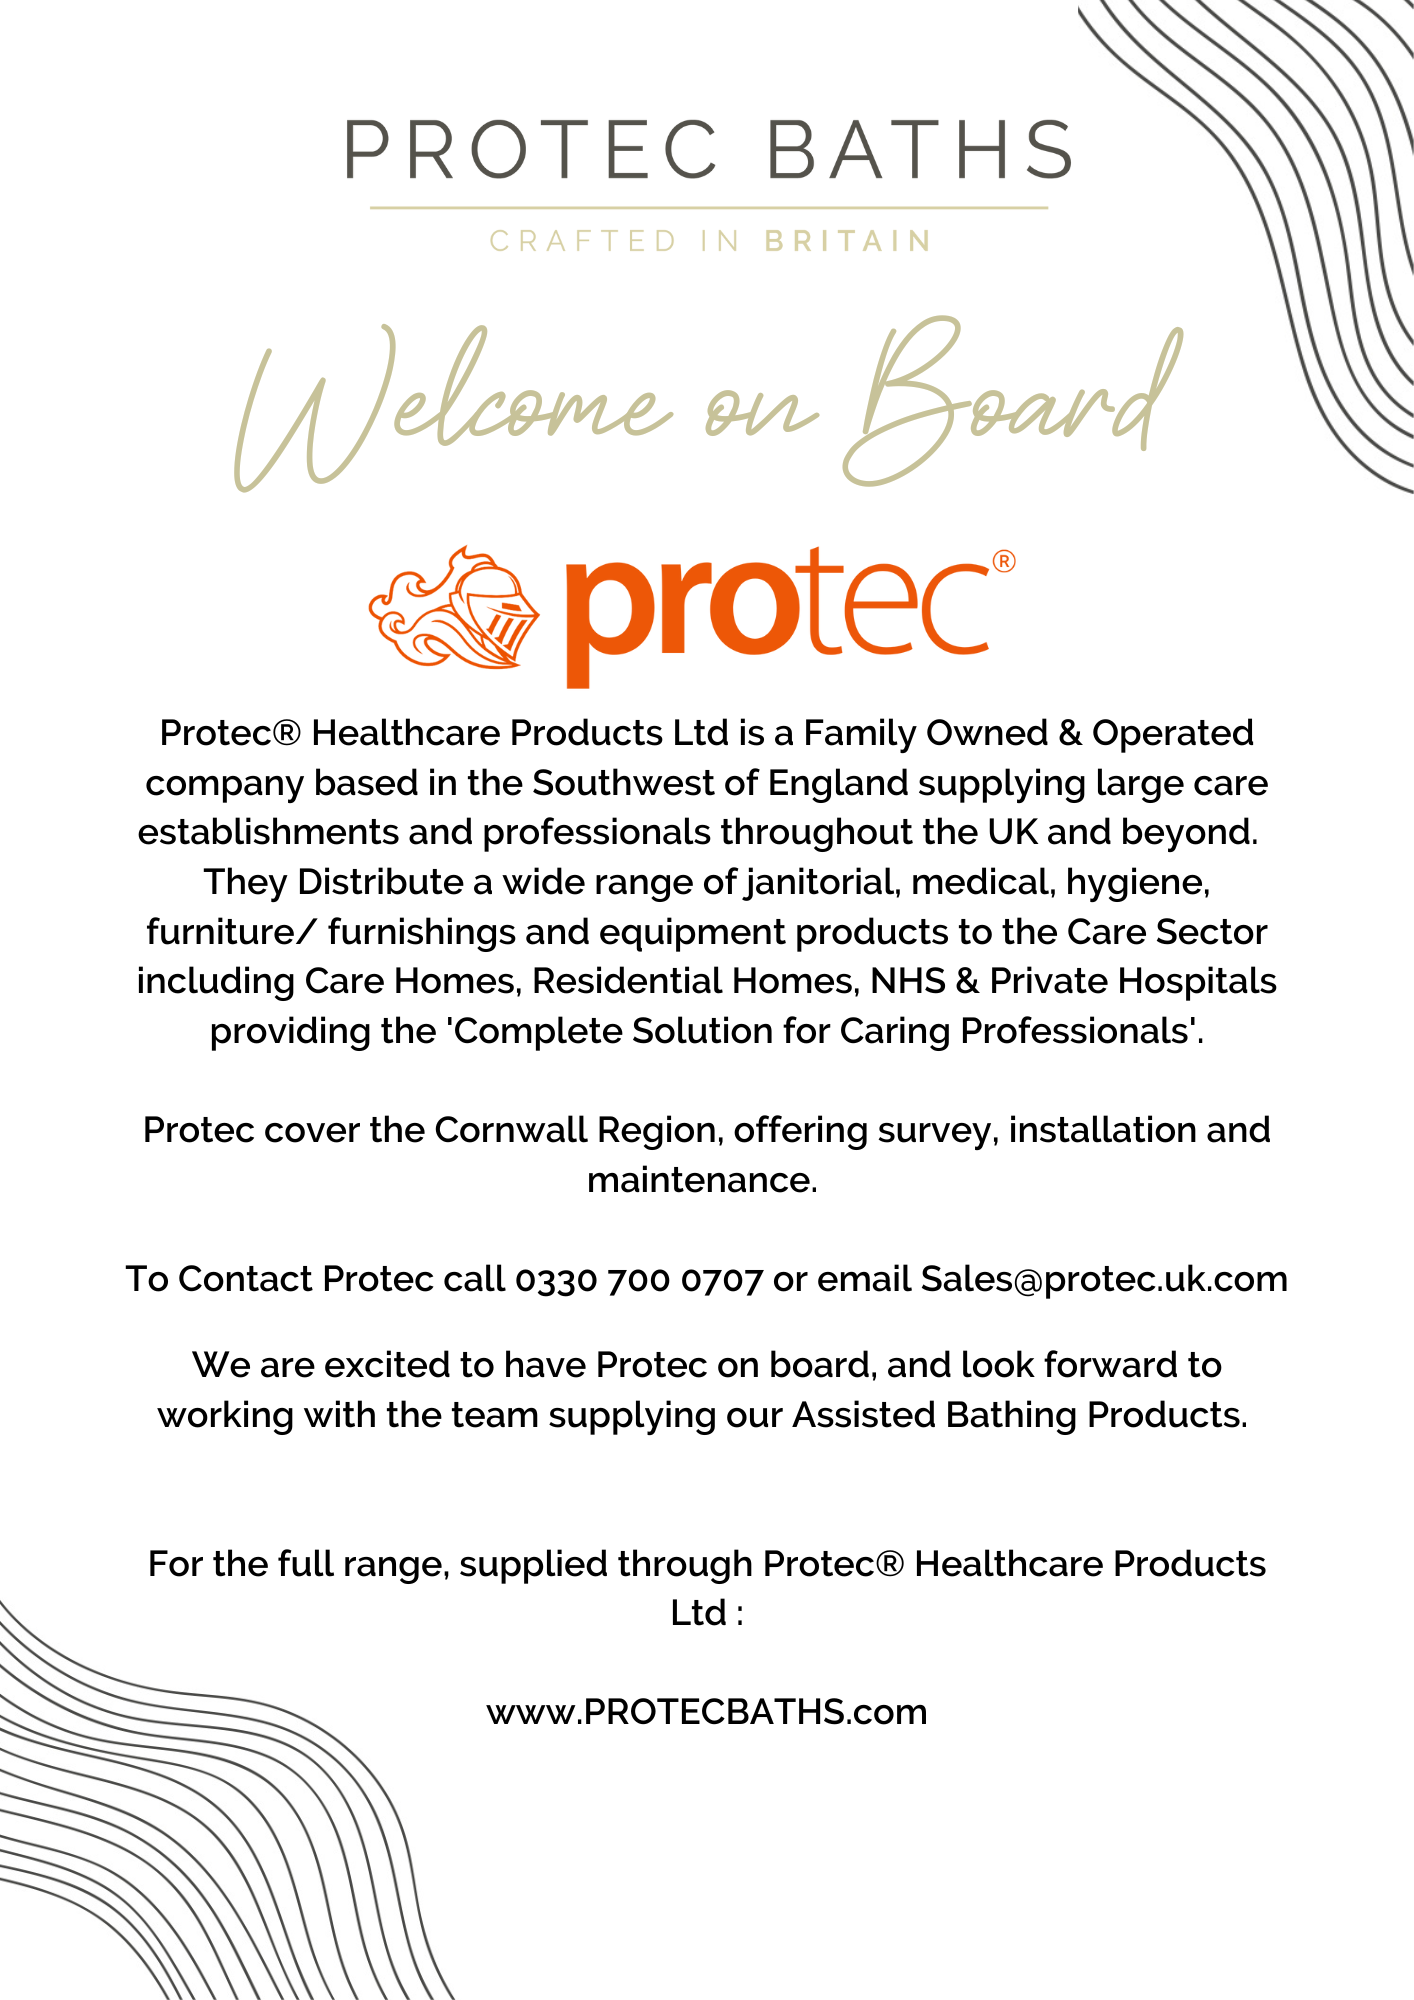 Protec Healthcare awarded distributorship in Cornwall for Baths Crafted in Britain!